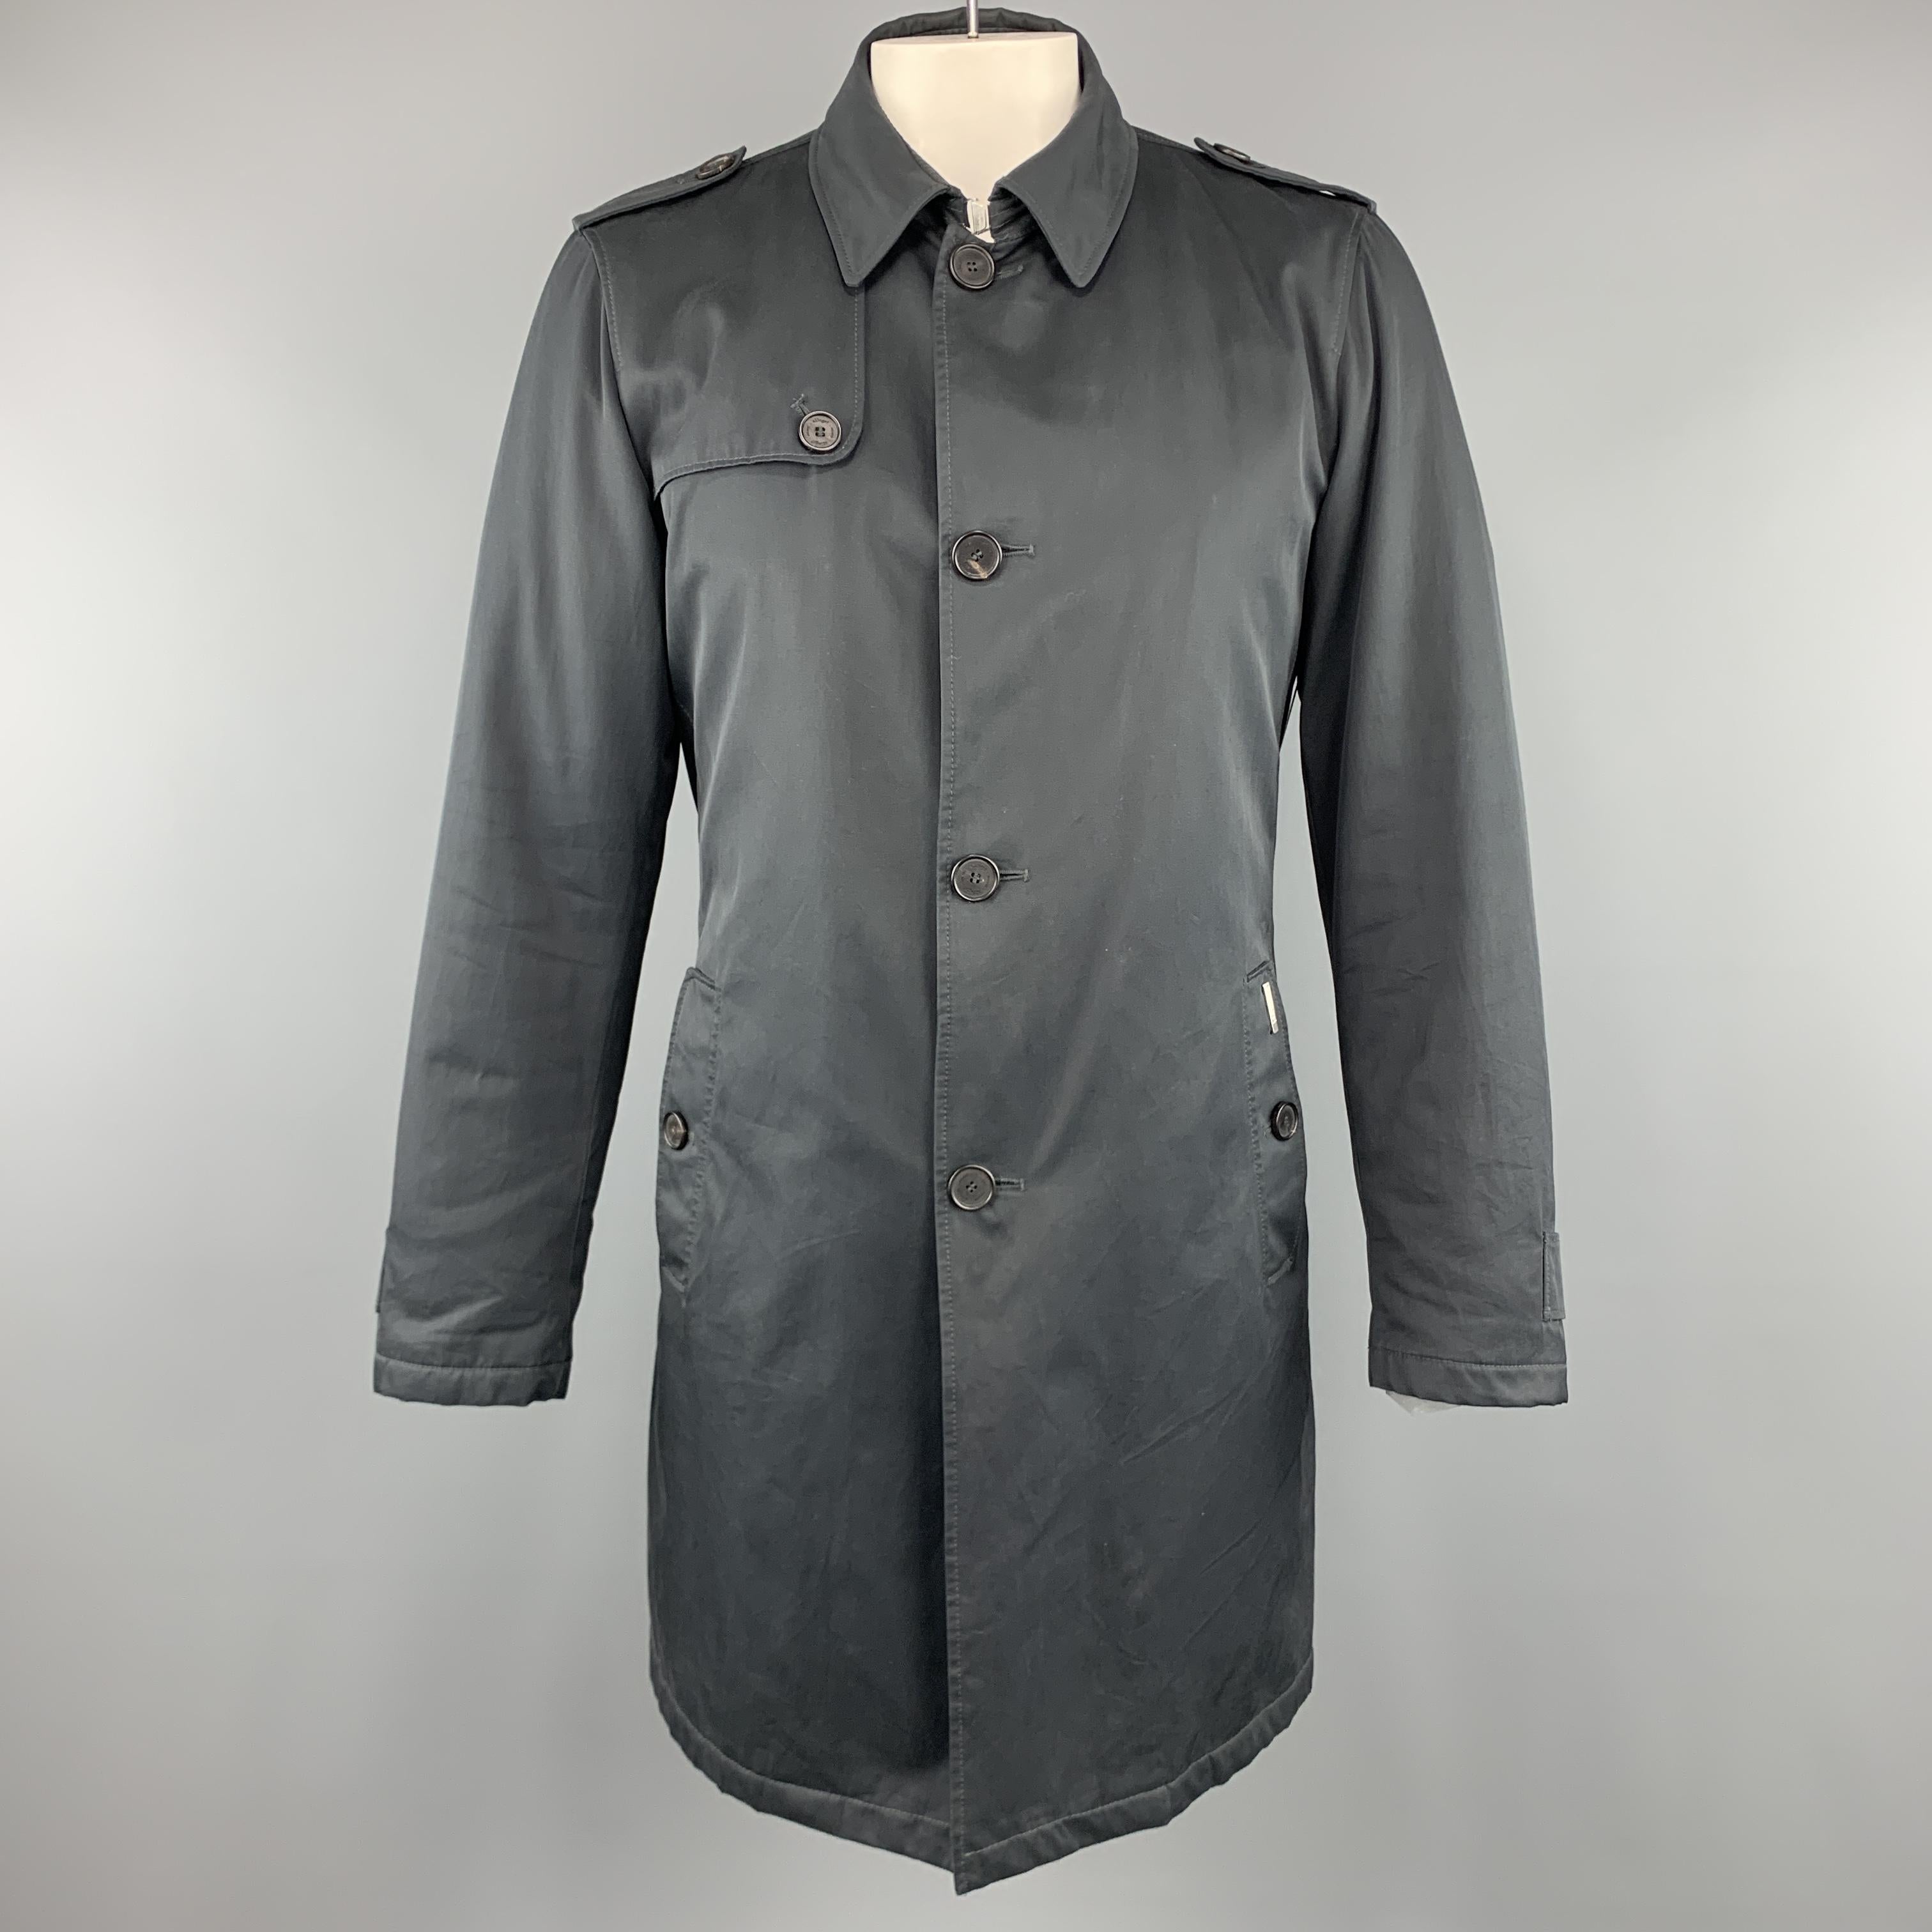 ALLEGRI trench coat comes in a muted navy nylon twill with a pointed collar, storm flap, epaulets, flap pockets, belted waist, and detachable liner. Made in Portugal.
 

Very Good Pre-Owned Condition.
Marked: IT 52

Measurements:

Shoulder: 18